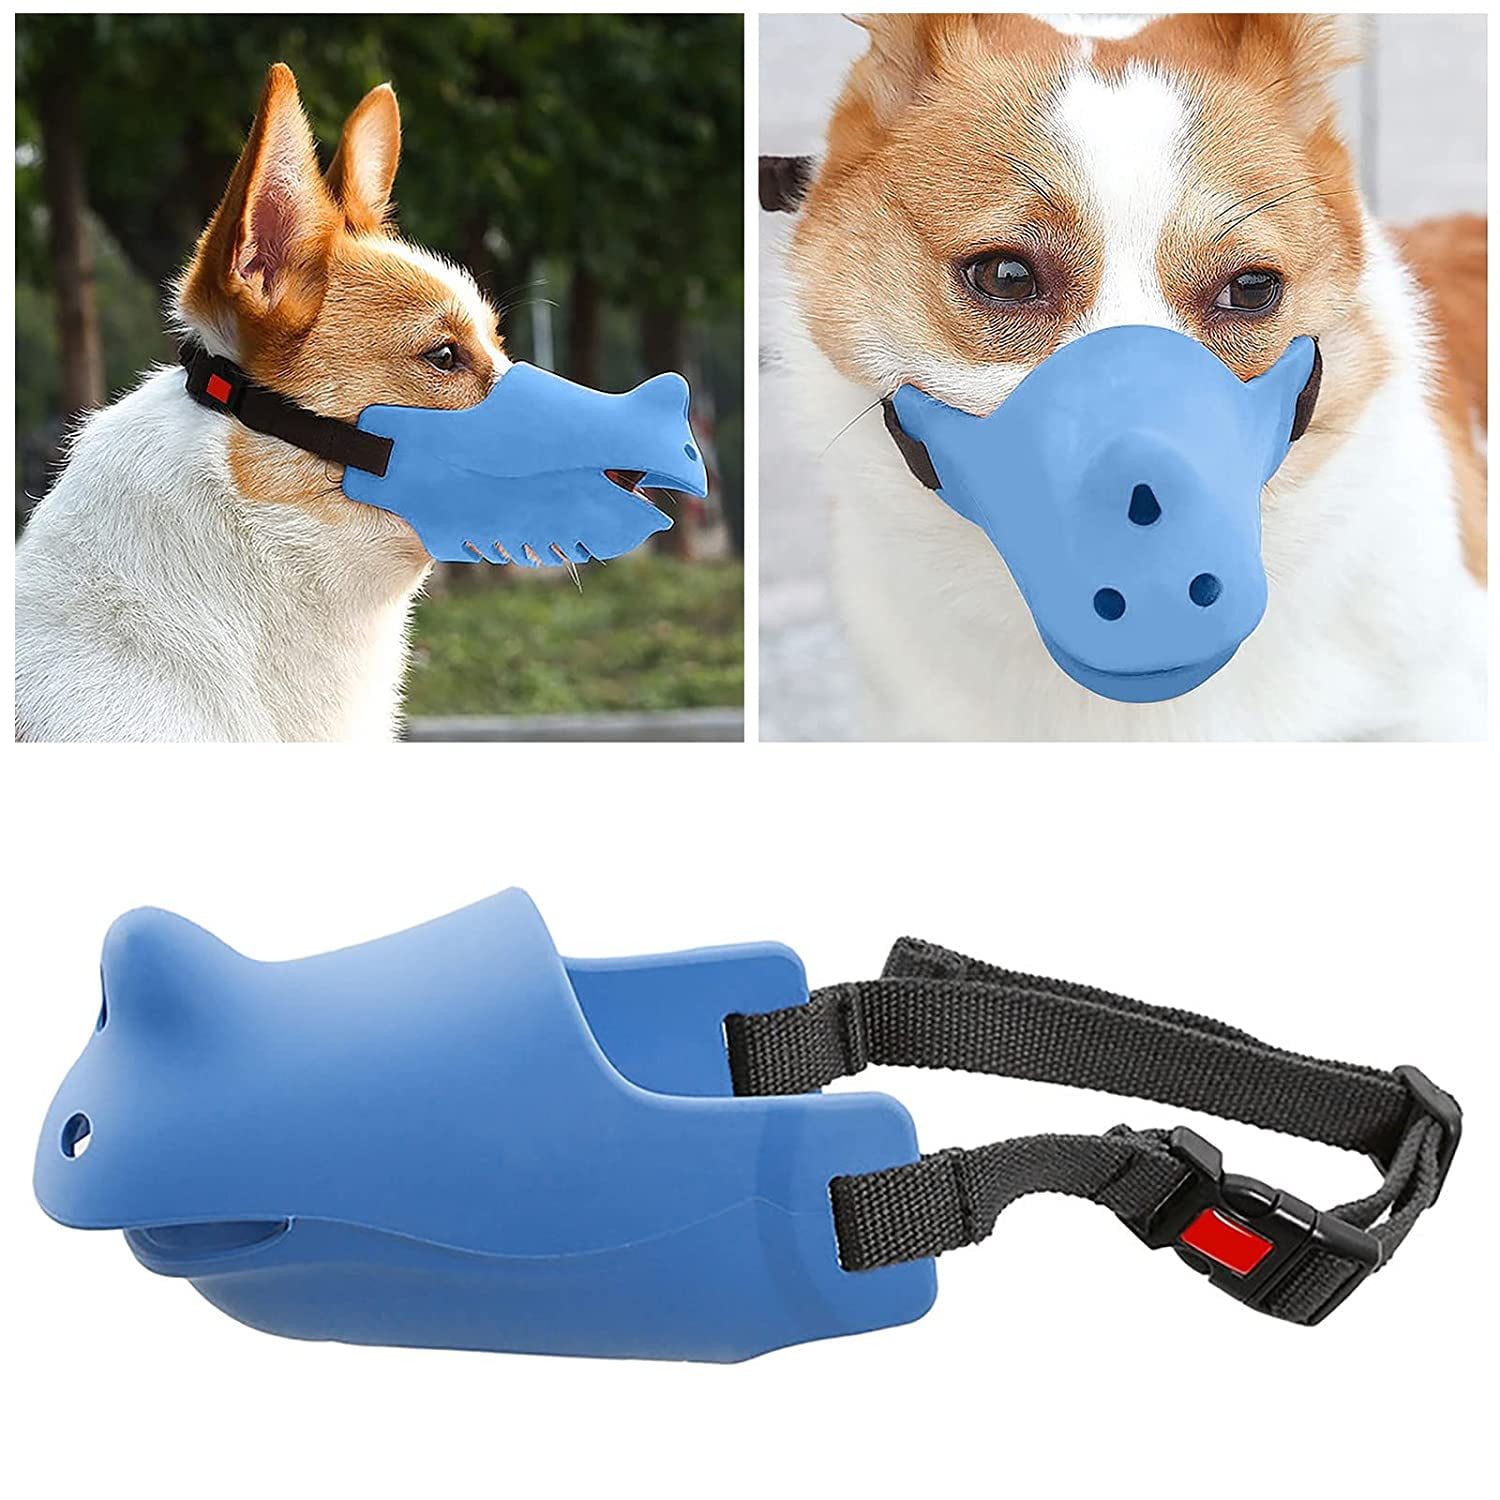 and Chewing Soft Duck Silicone Mouth Cover with Adjustable Strap LUCKYPAW Dog Muzzle for Small Dogs Corgi Poodle to Prevent Barking Biting 